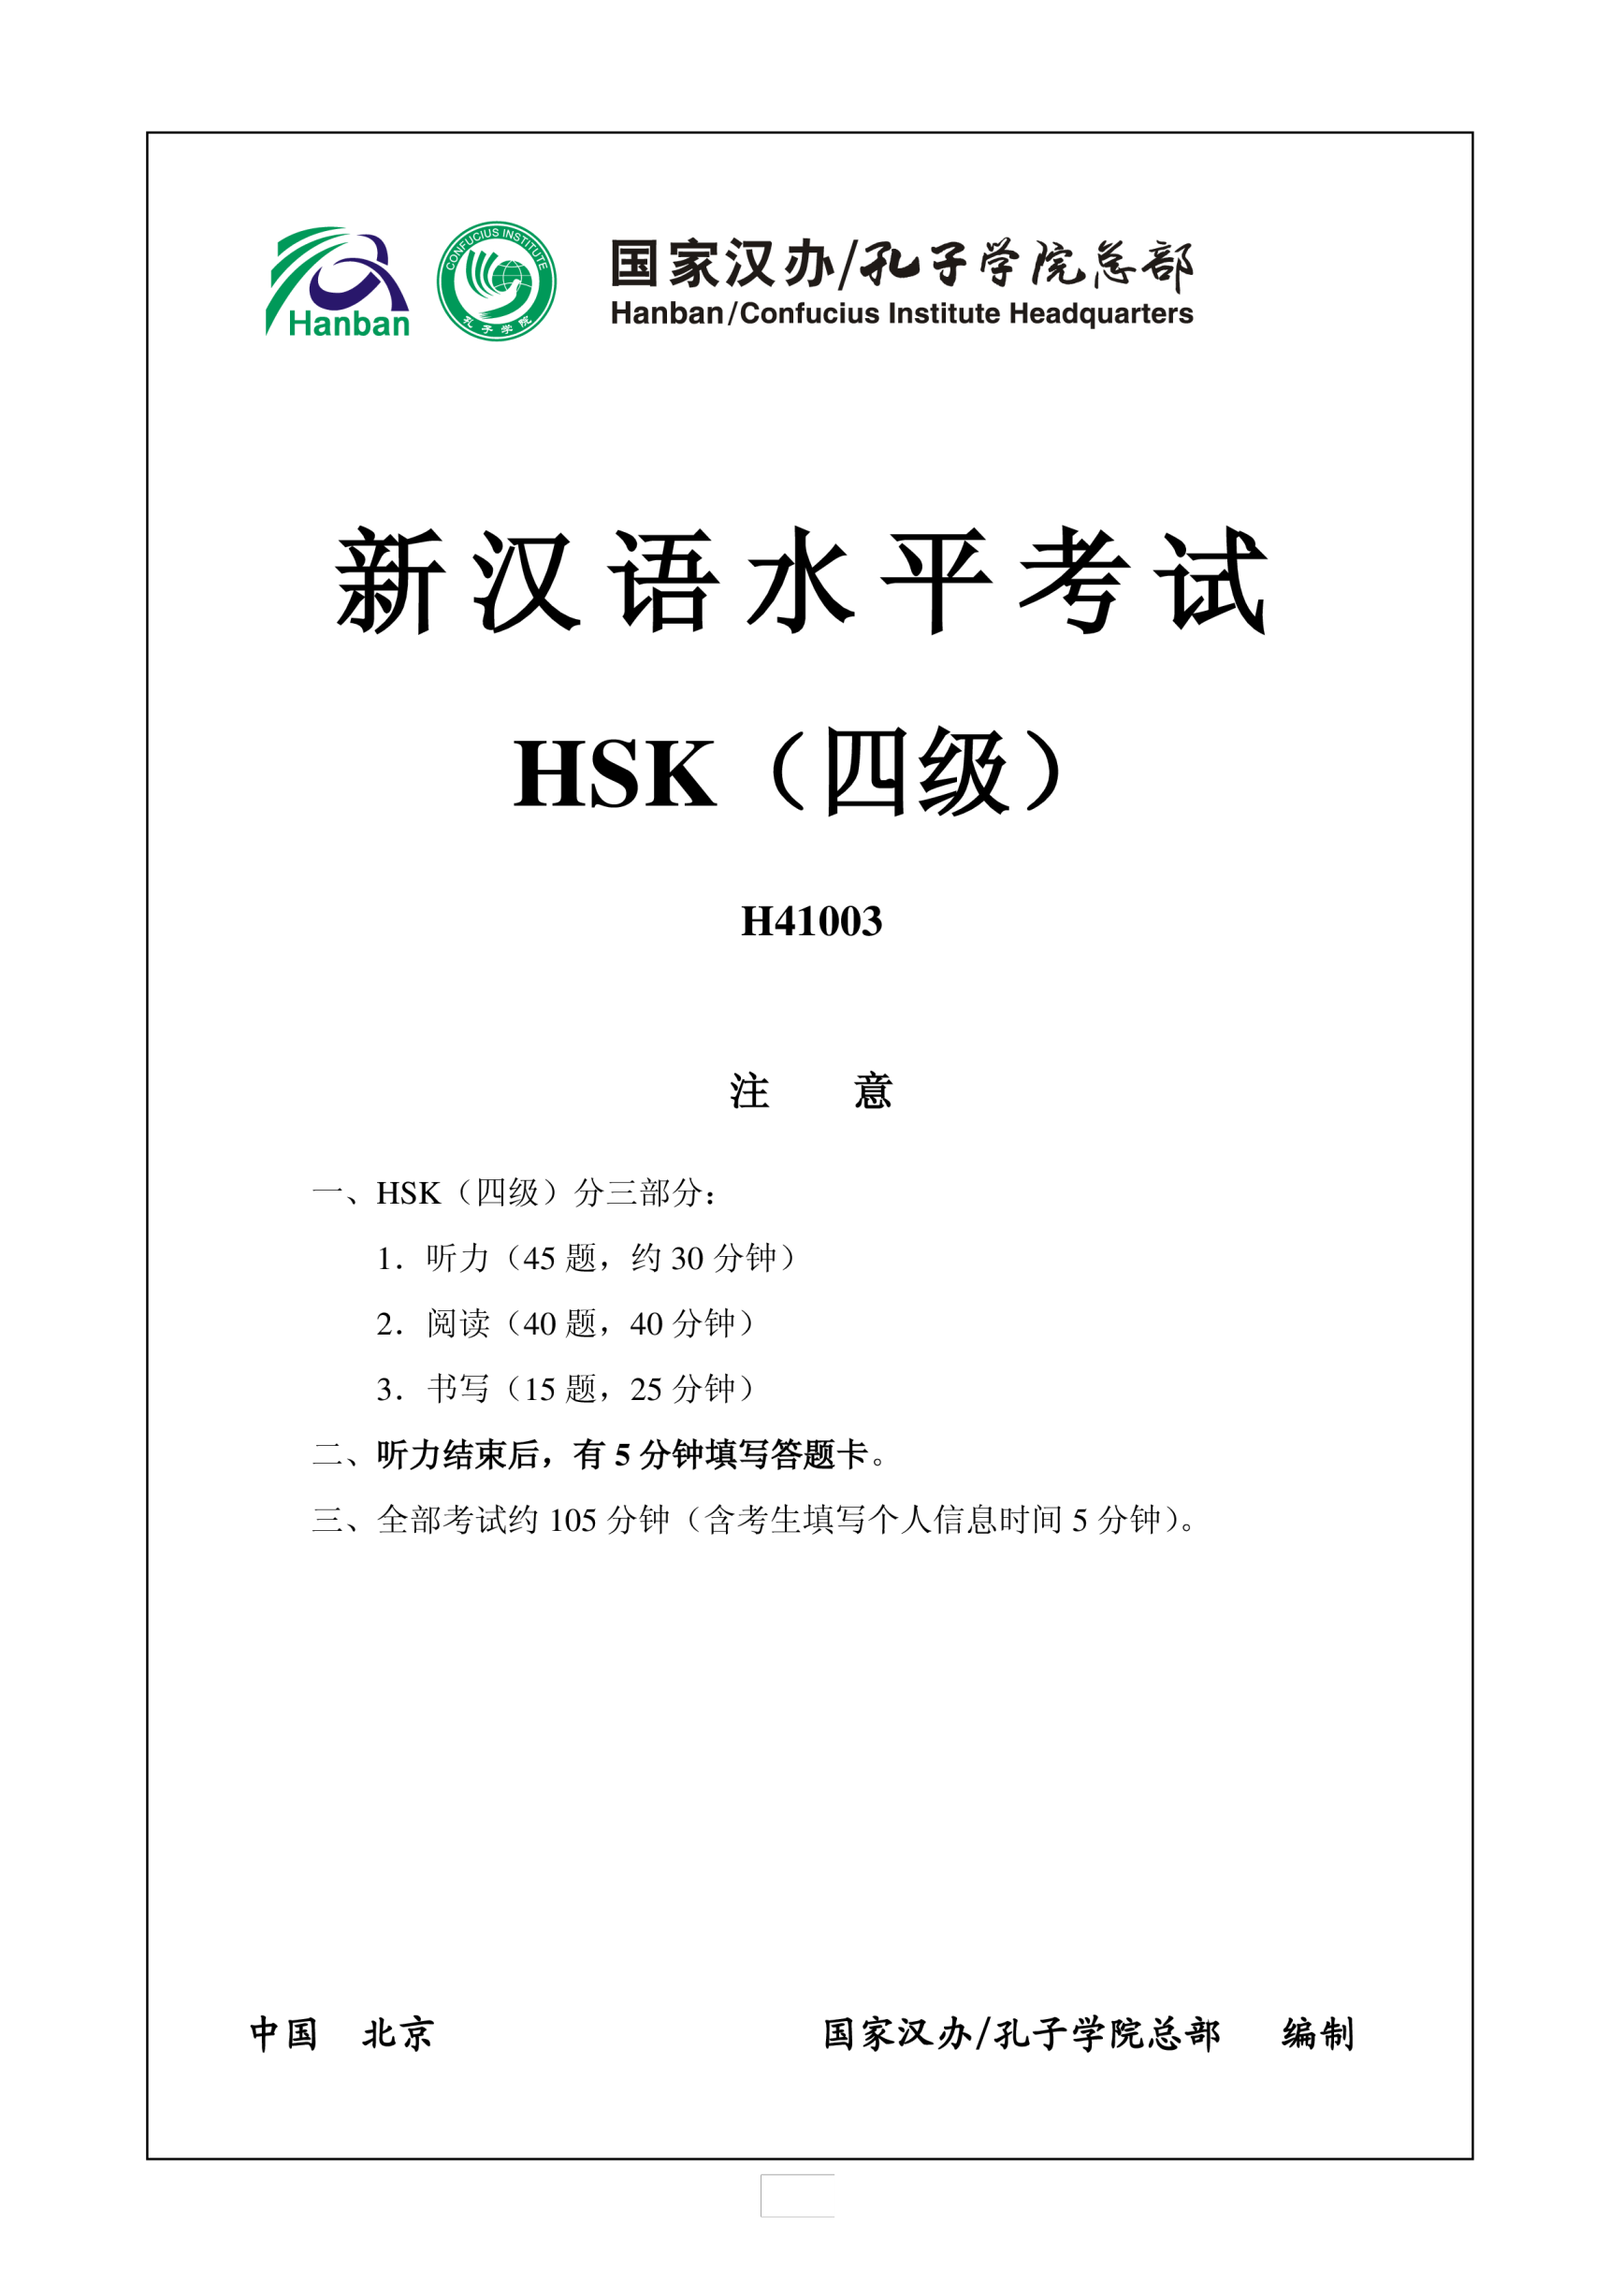 template preview imageHSK4 Chinese Exam including Answers # HSK H41003